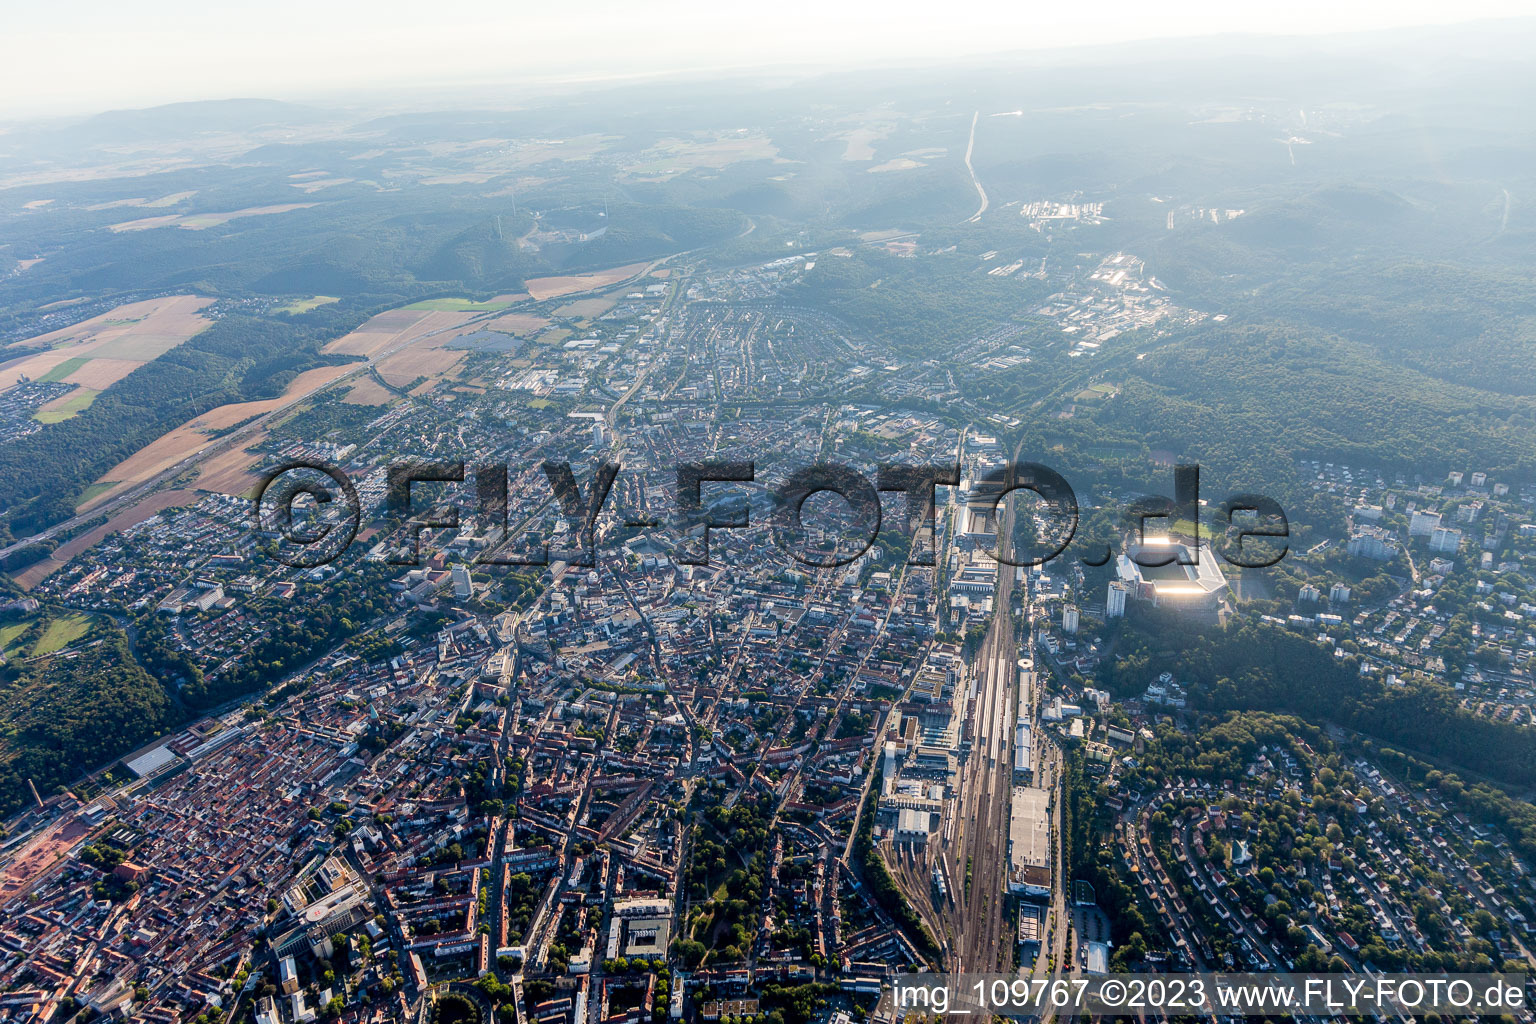 Kaiserslautern in the state Rhineland-Palatinate, Germany from above